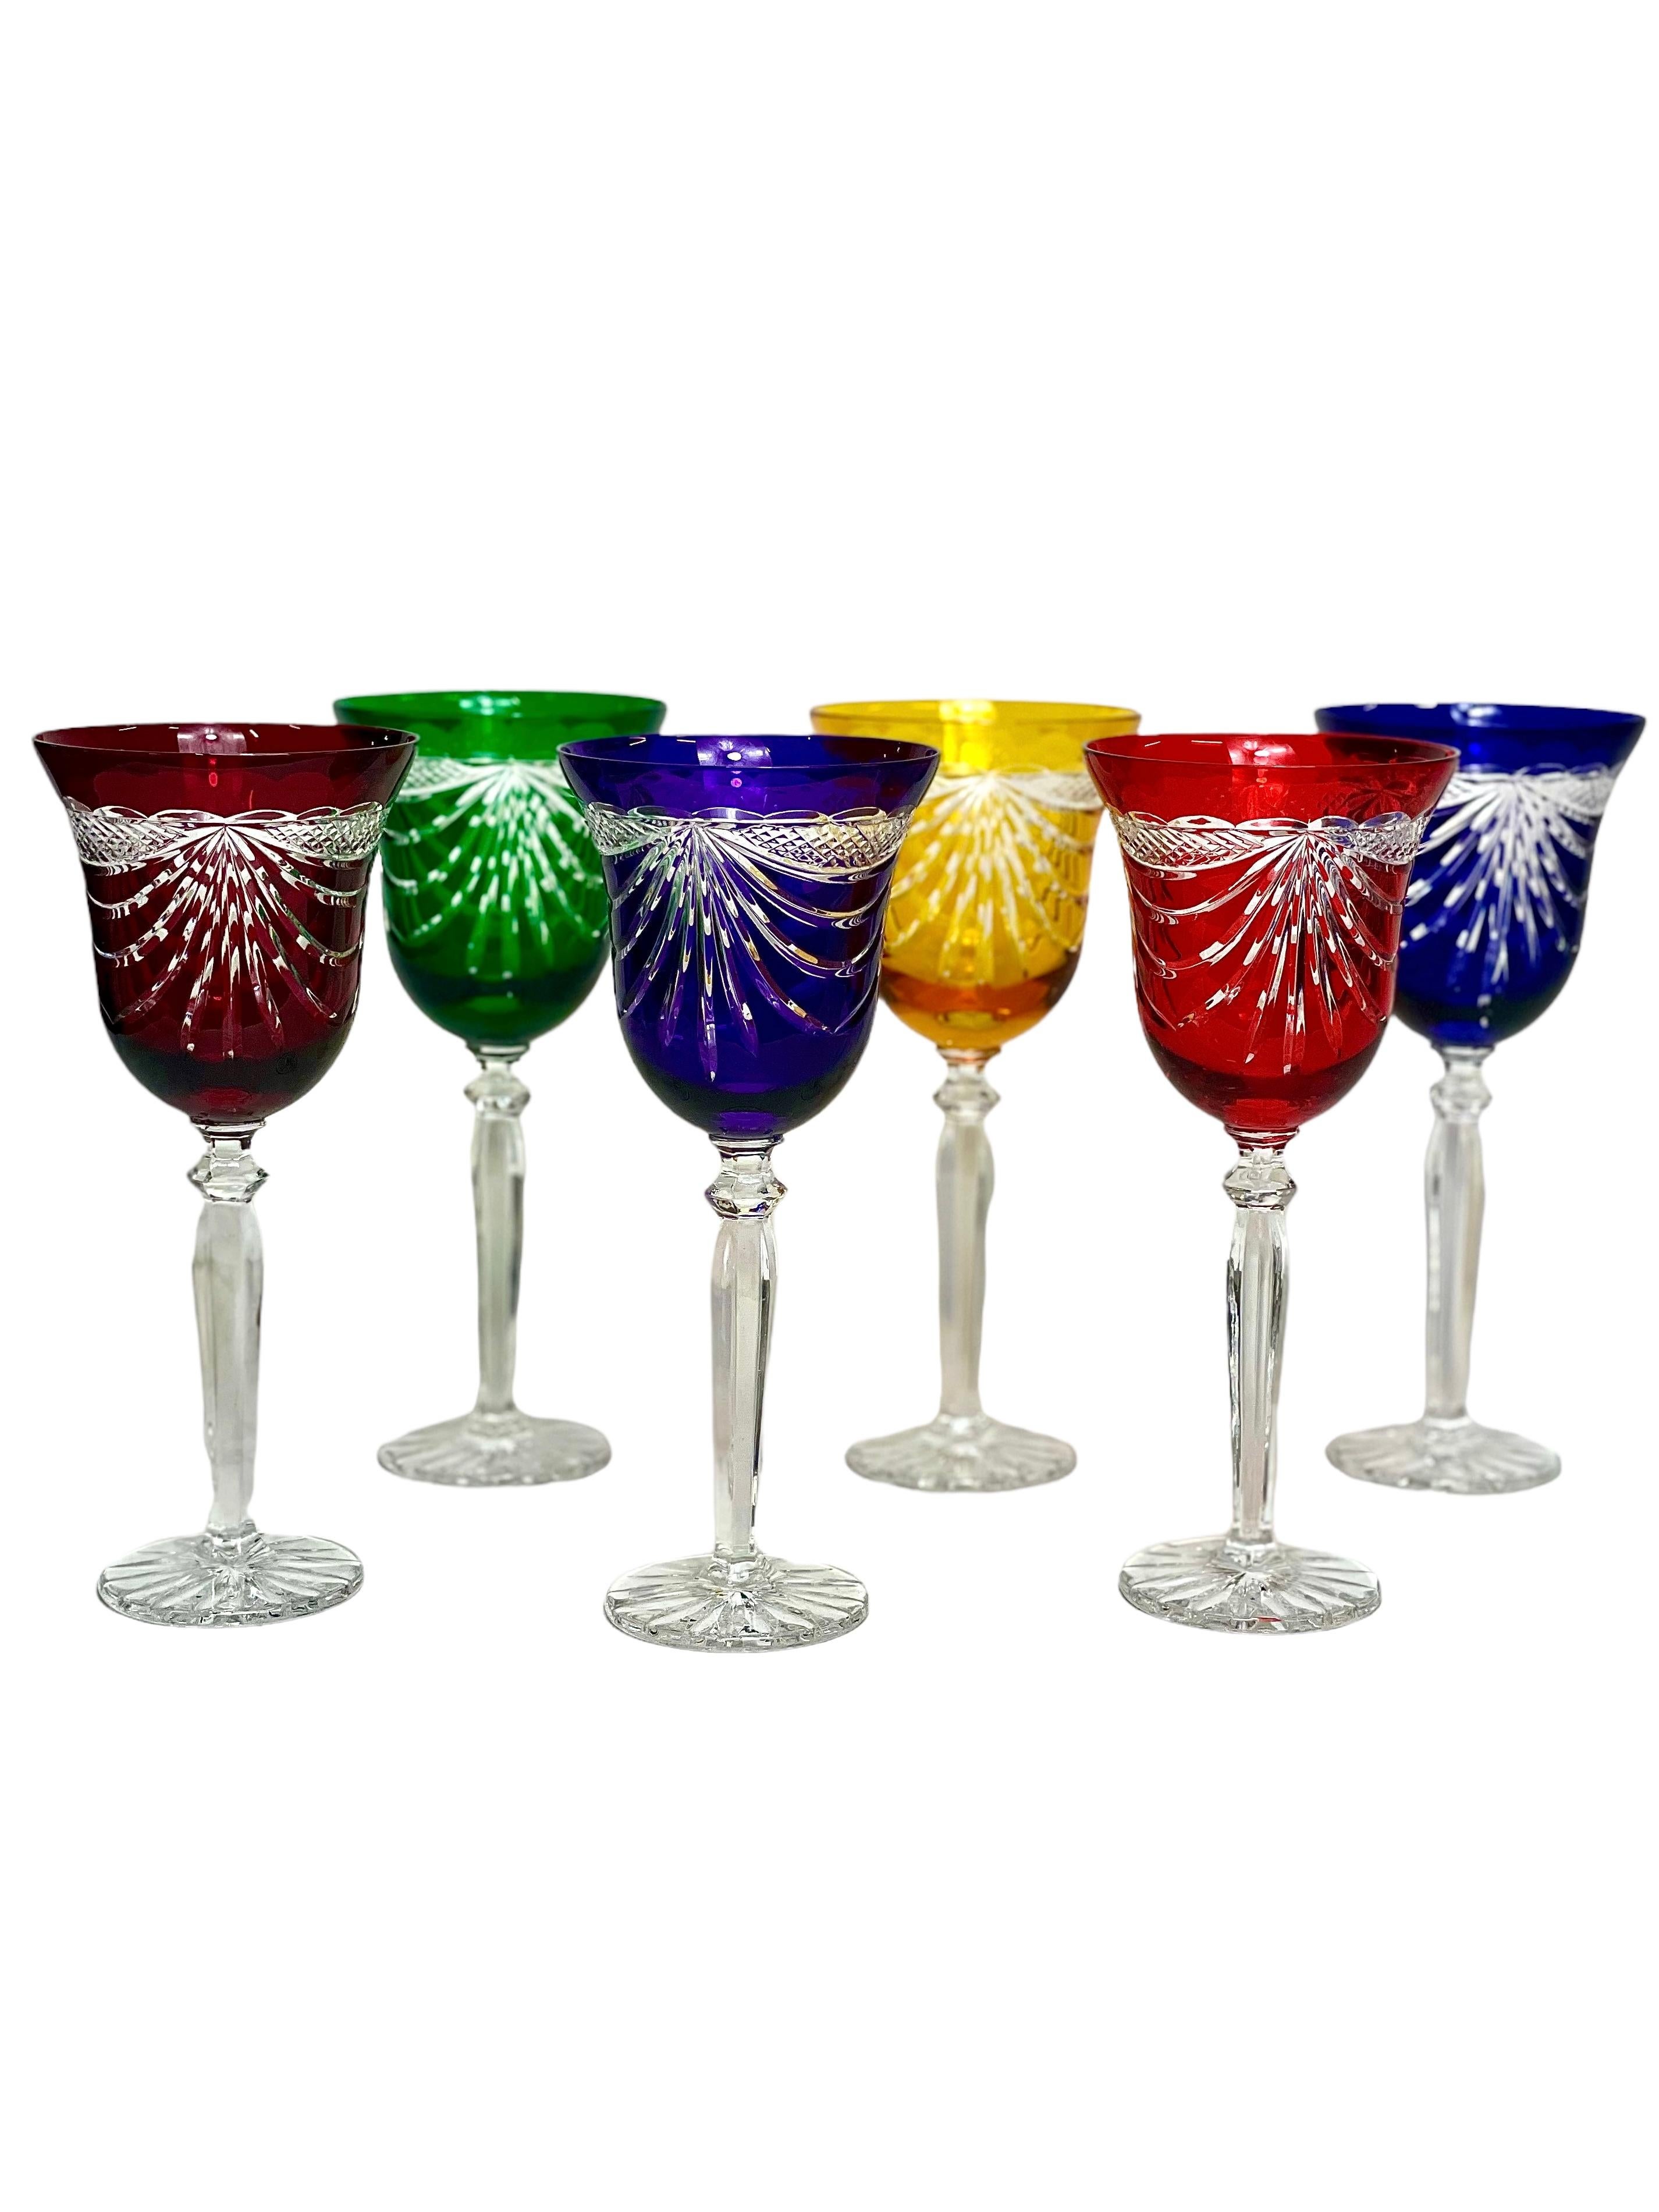 A fabulous set of six crystal Rhine (or white) wine glasses, in a rainbow of colours, and richly cut with an exquisite swag motif. These glittering glasses are an unusual shape, with a cupped bowl, tall stem and flat, round, star-cut pedestal. Each